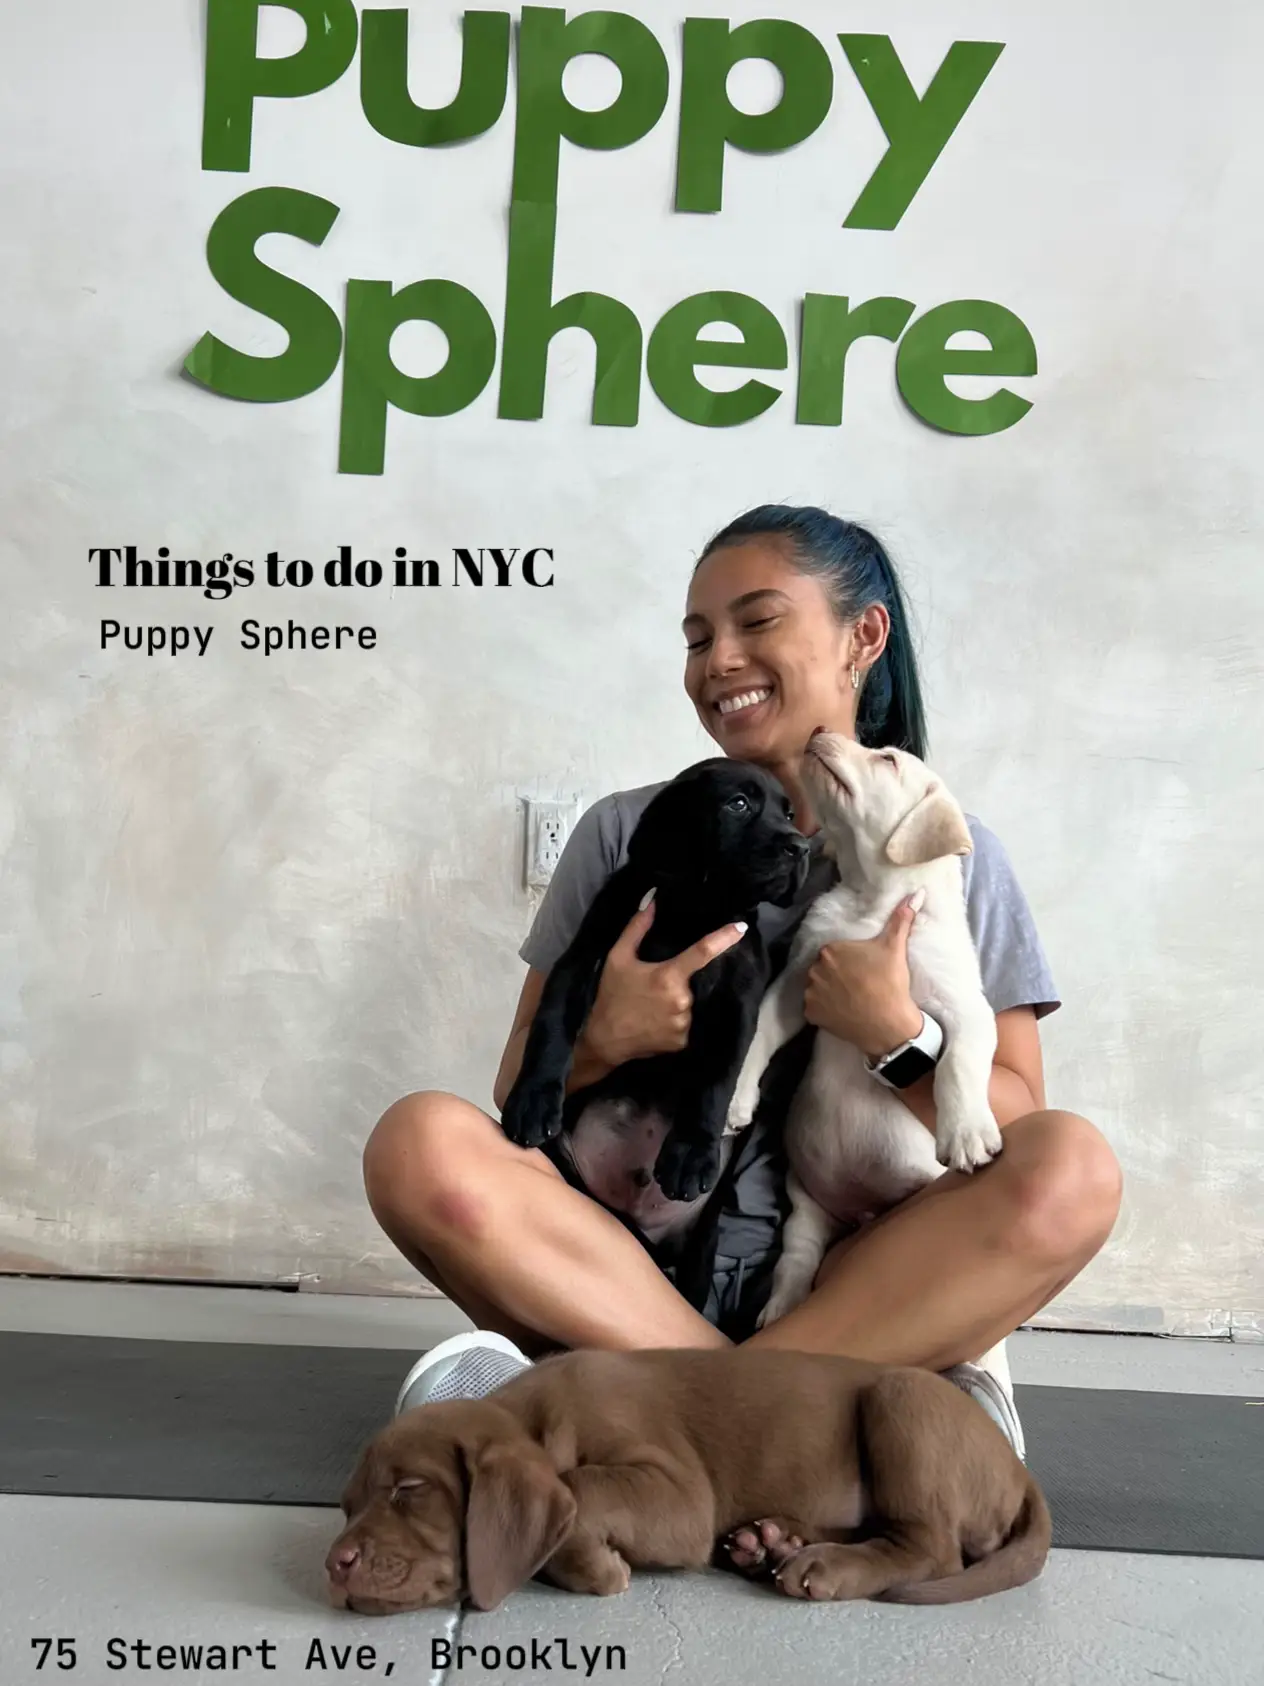 Puppy Yoga in Brooklyn 🐶, Gallery posted by Marielle ✨